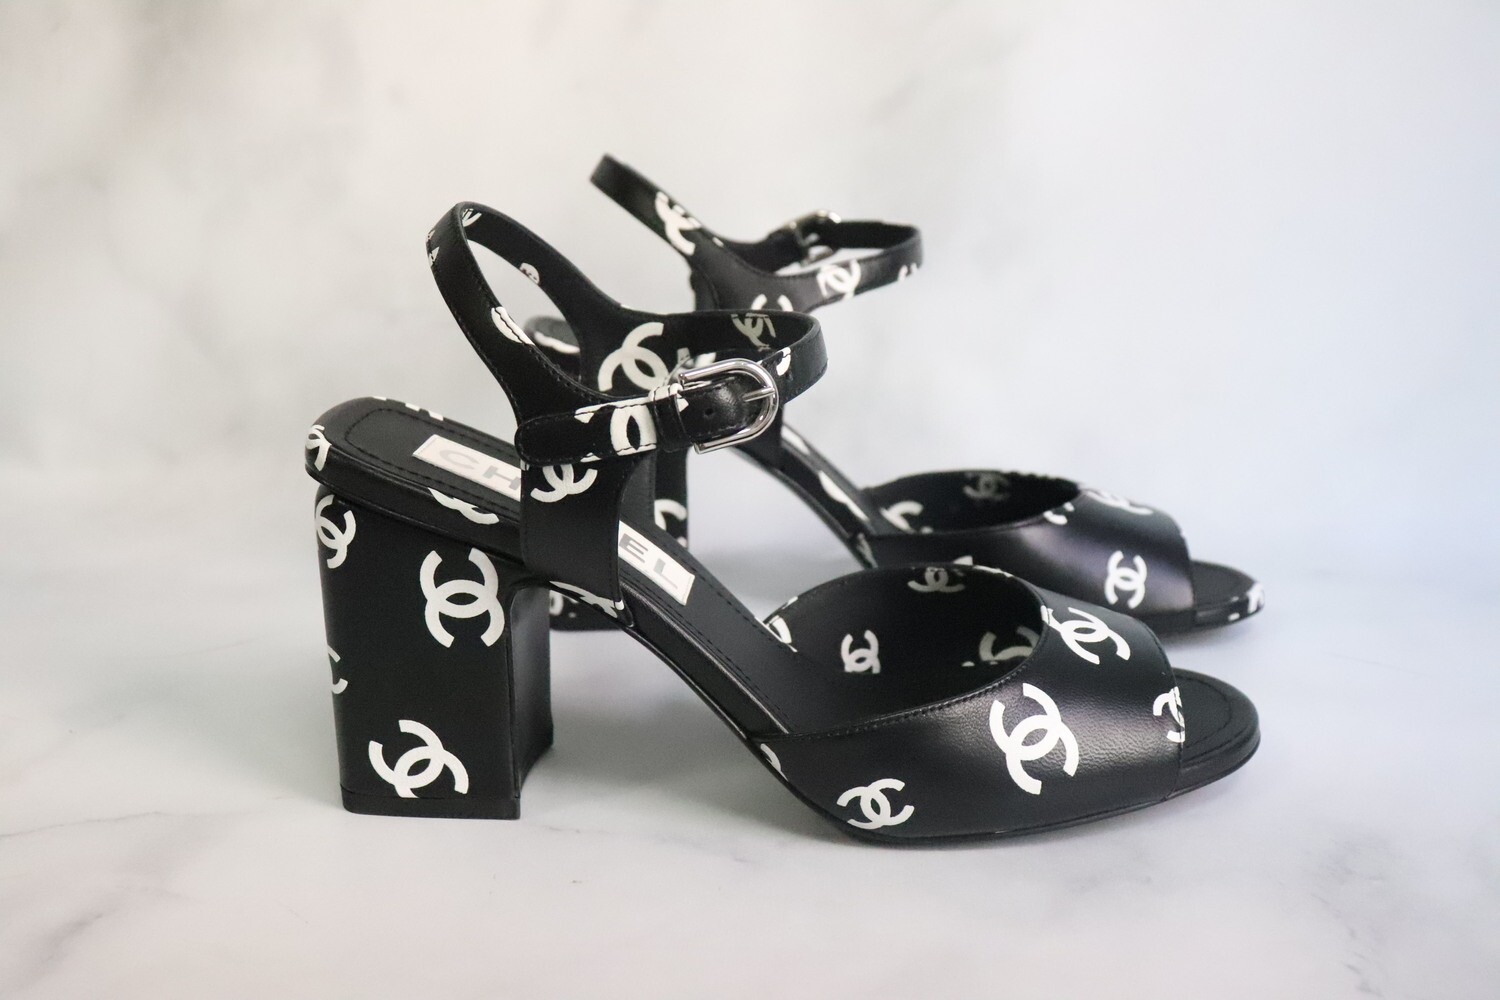 Chanel Shoes, Black with White CCs, Heels, Size 37, New in Box